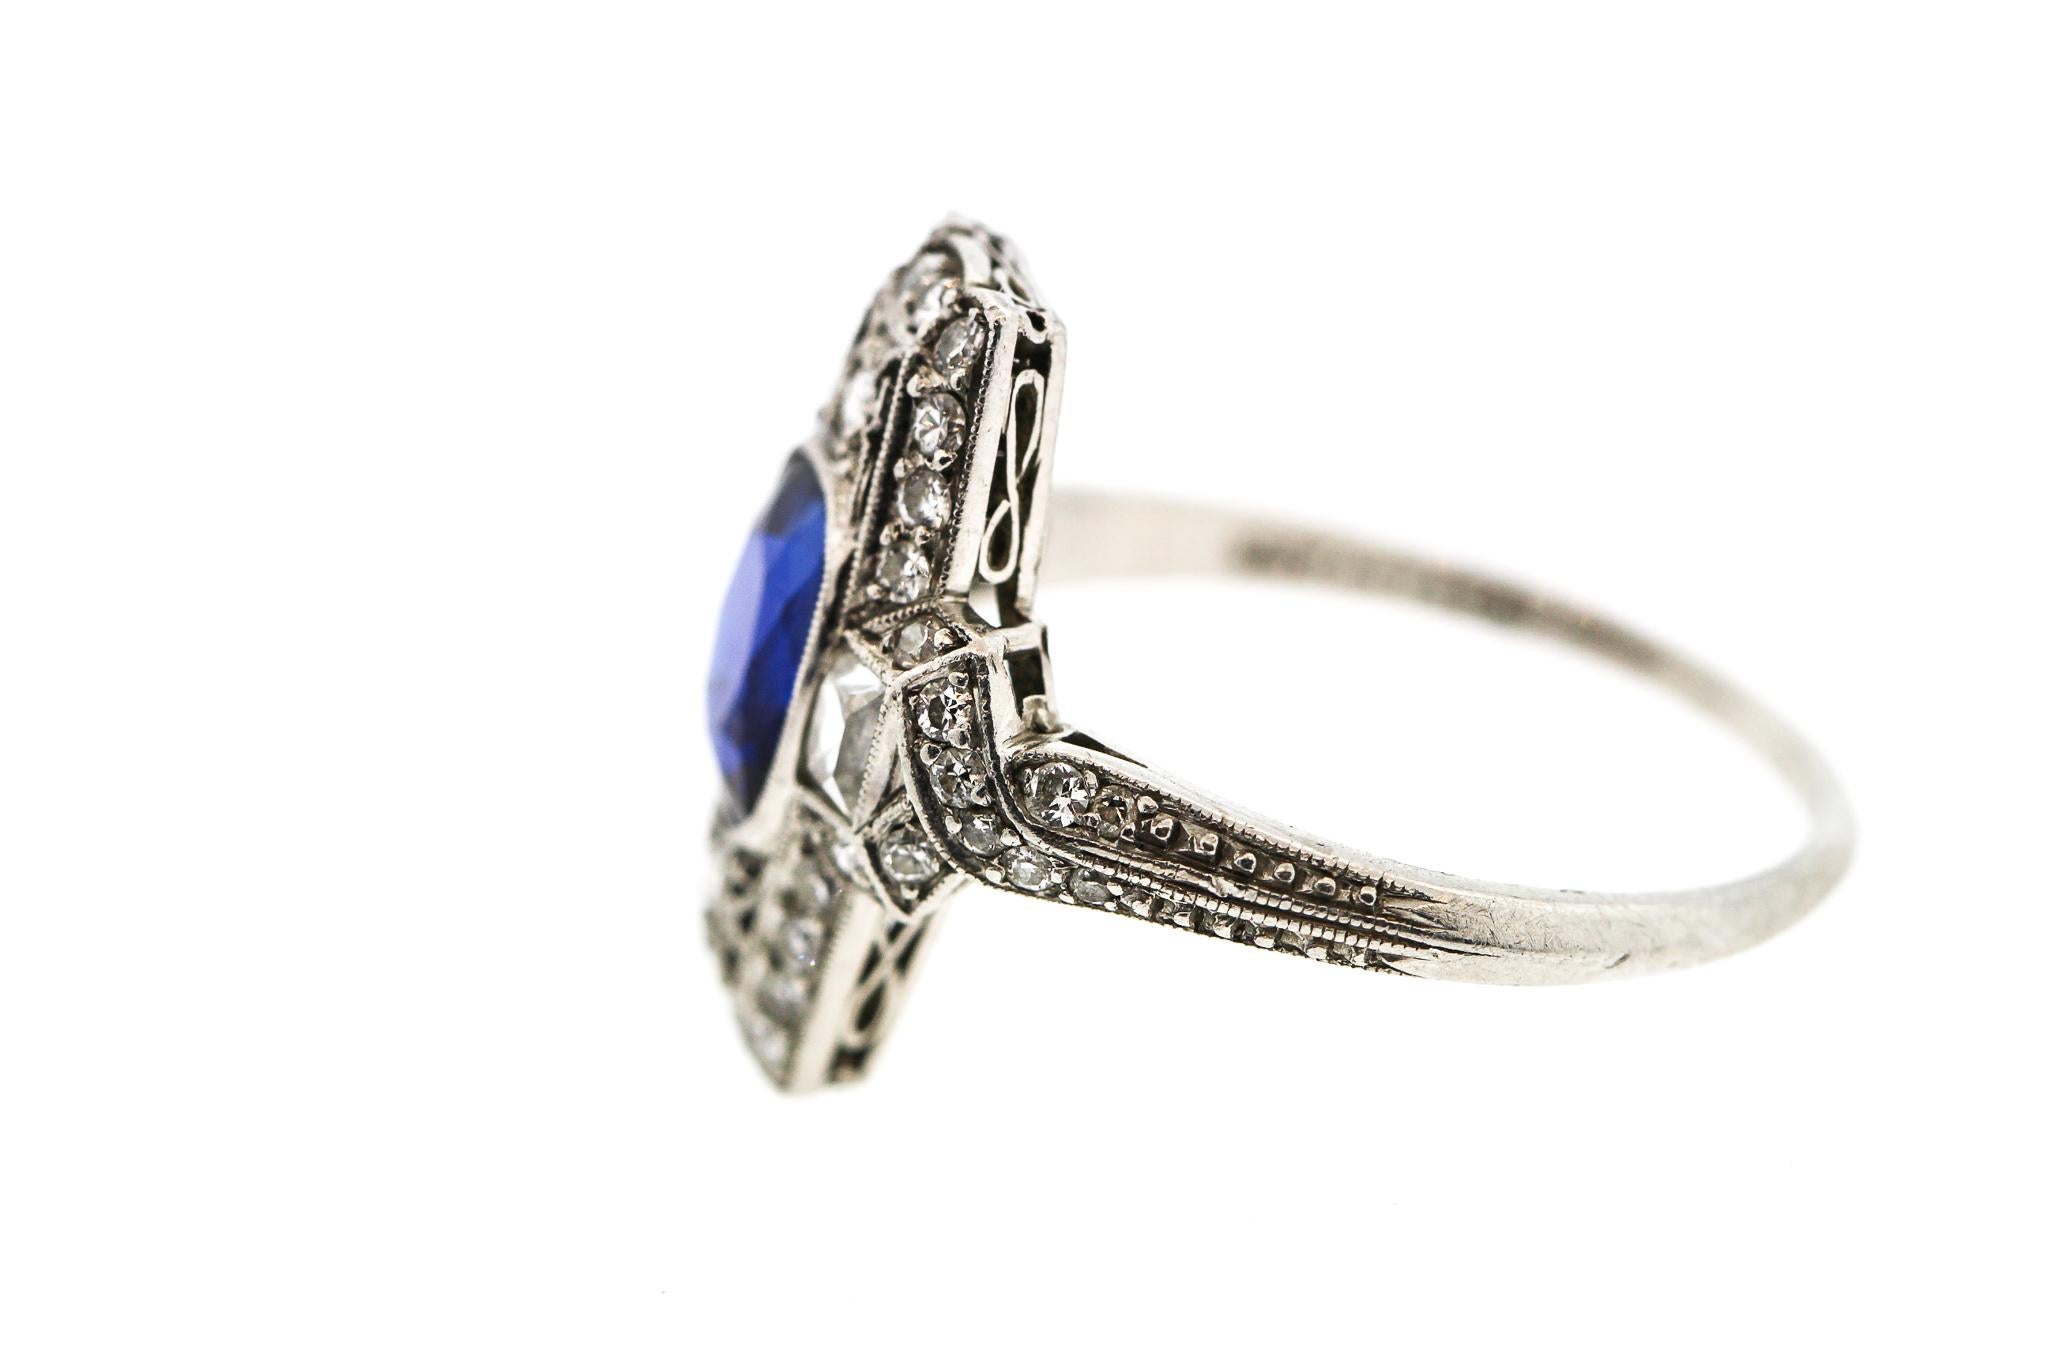 Tiffany & Co. Art Deco Platinum Cushion Sapphire Diamond Ring In Good Condition For Sale In New York, NY